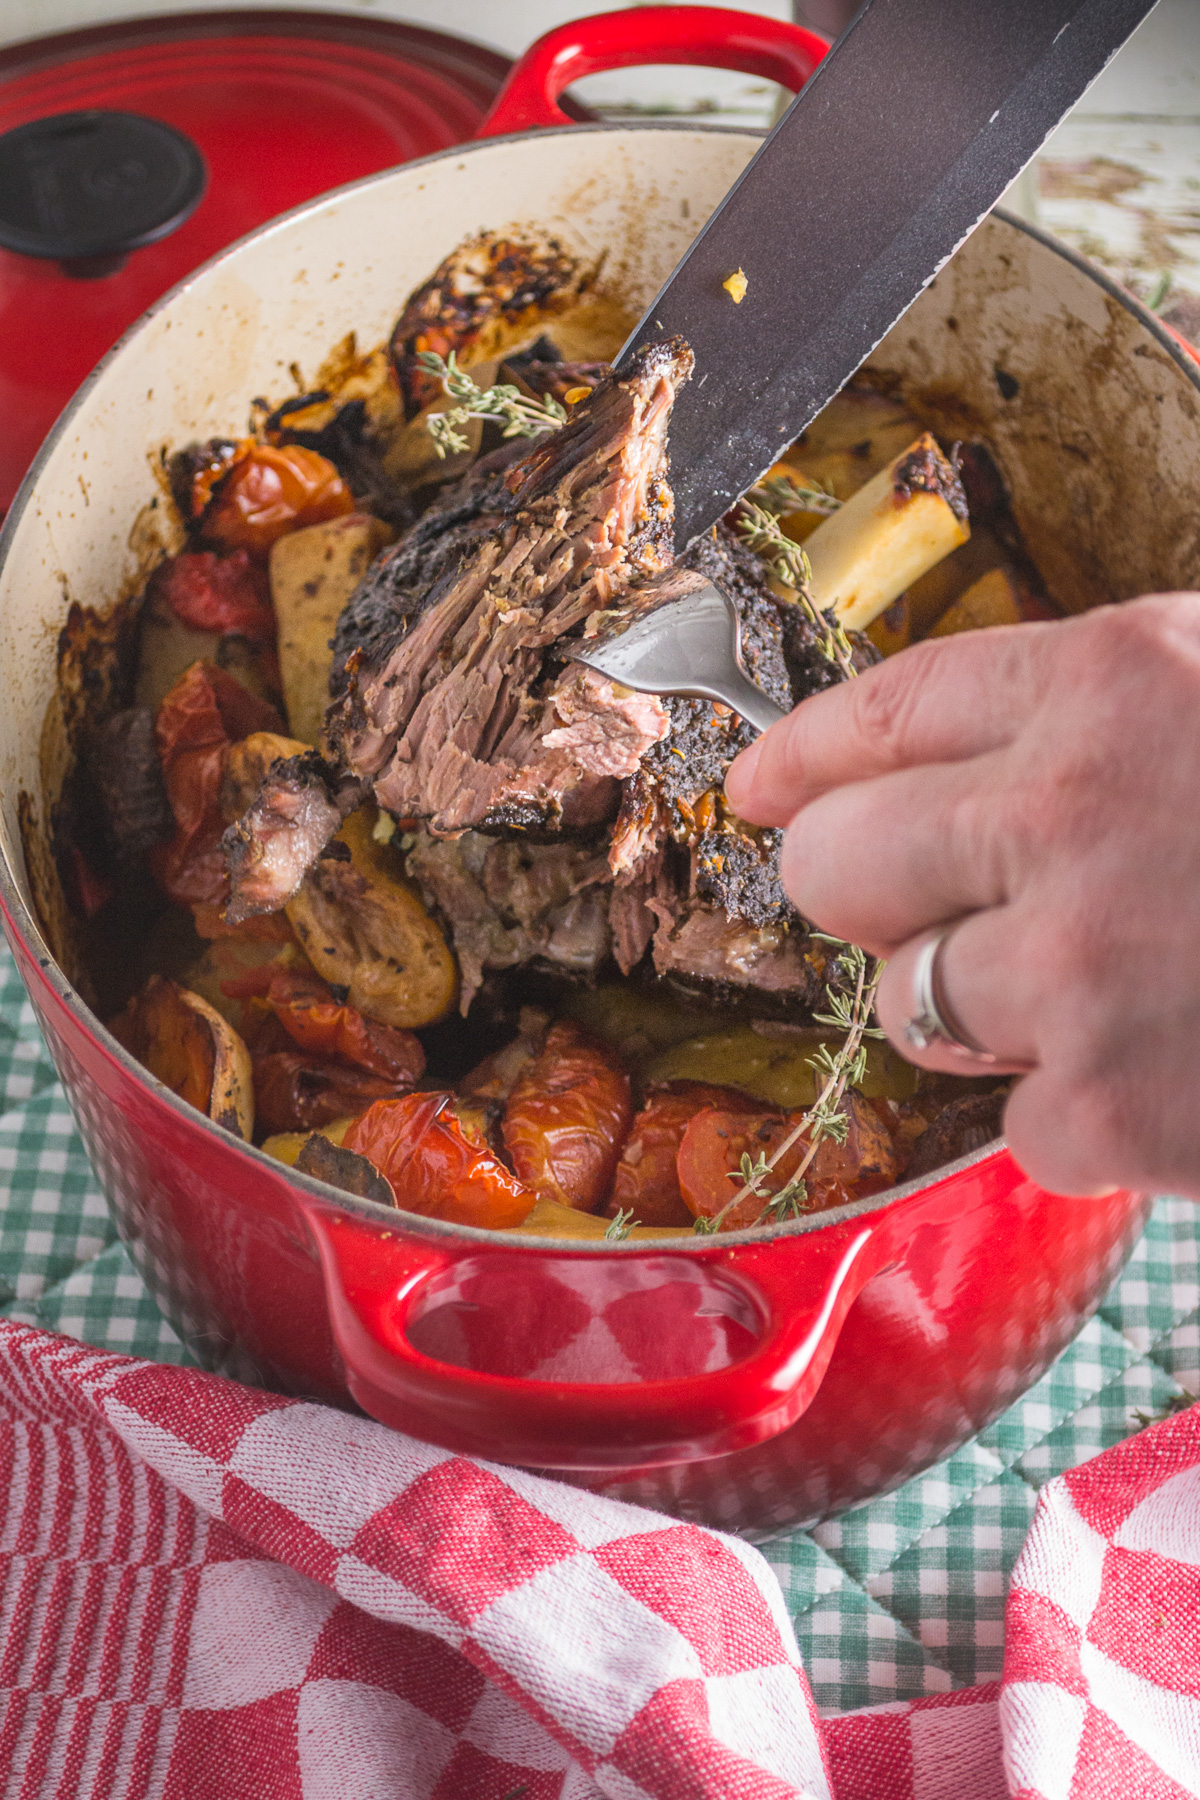 Closeup of someone's hands carving slow cooked Greek lamb on top of vegetables in a red pot